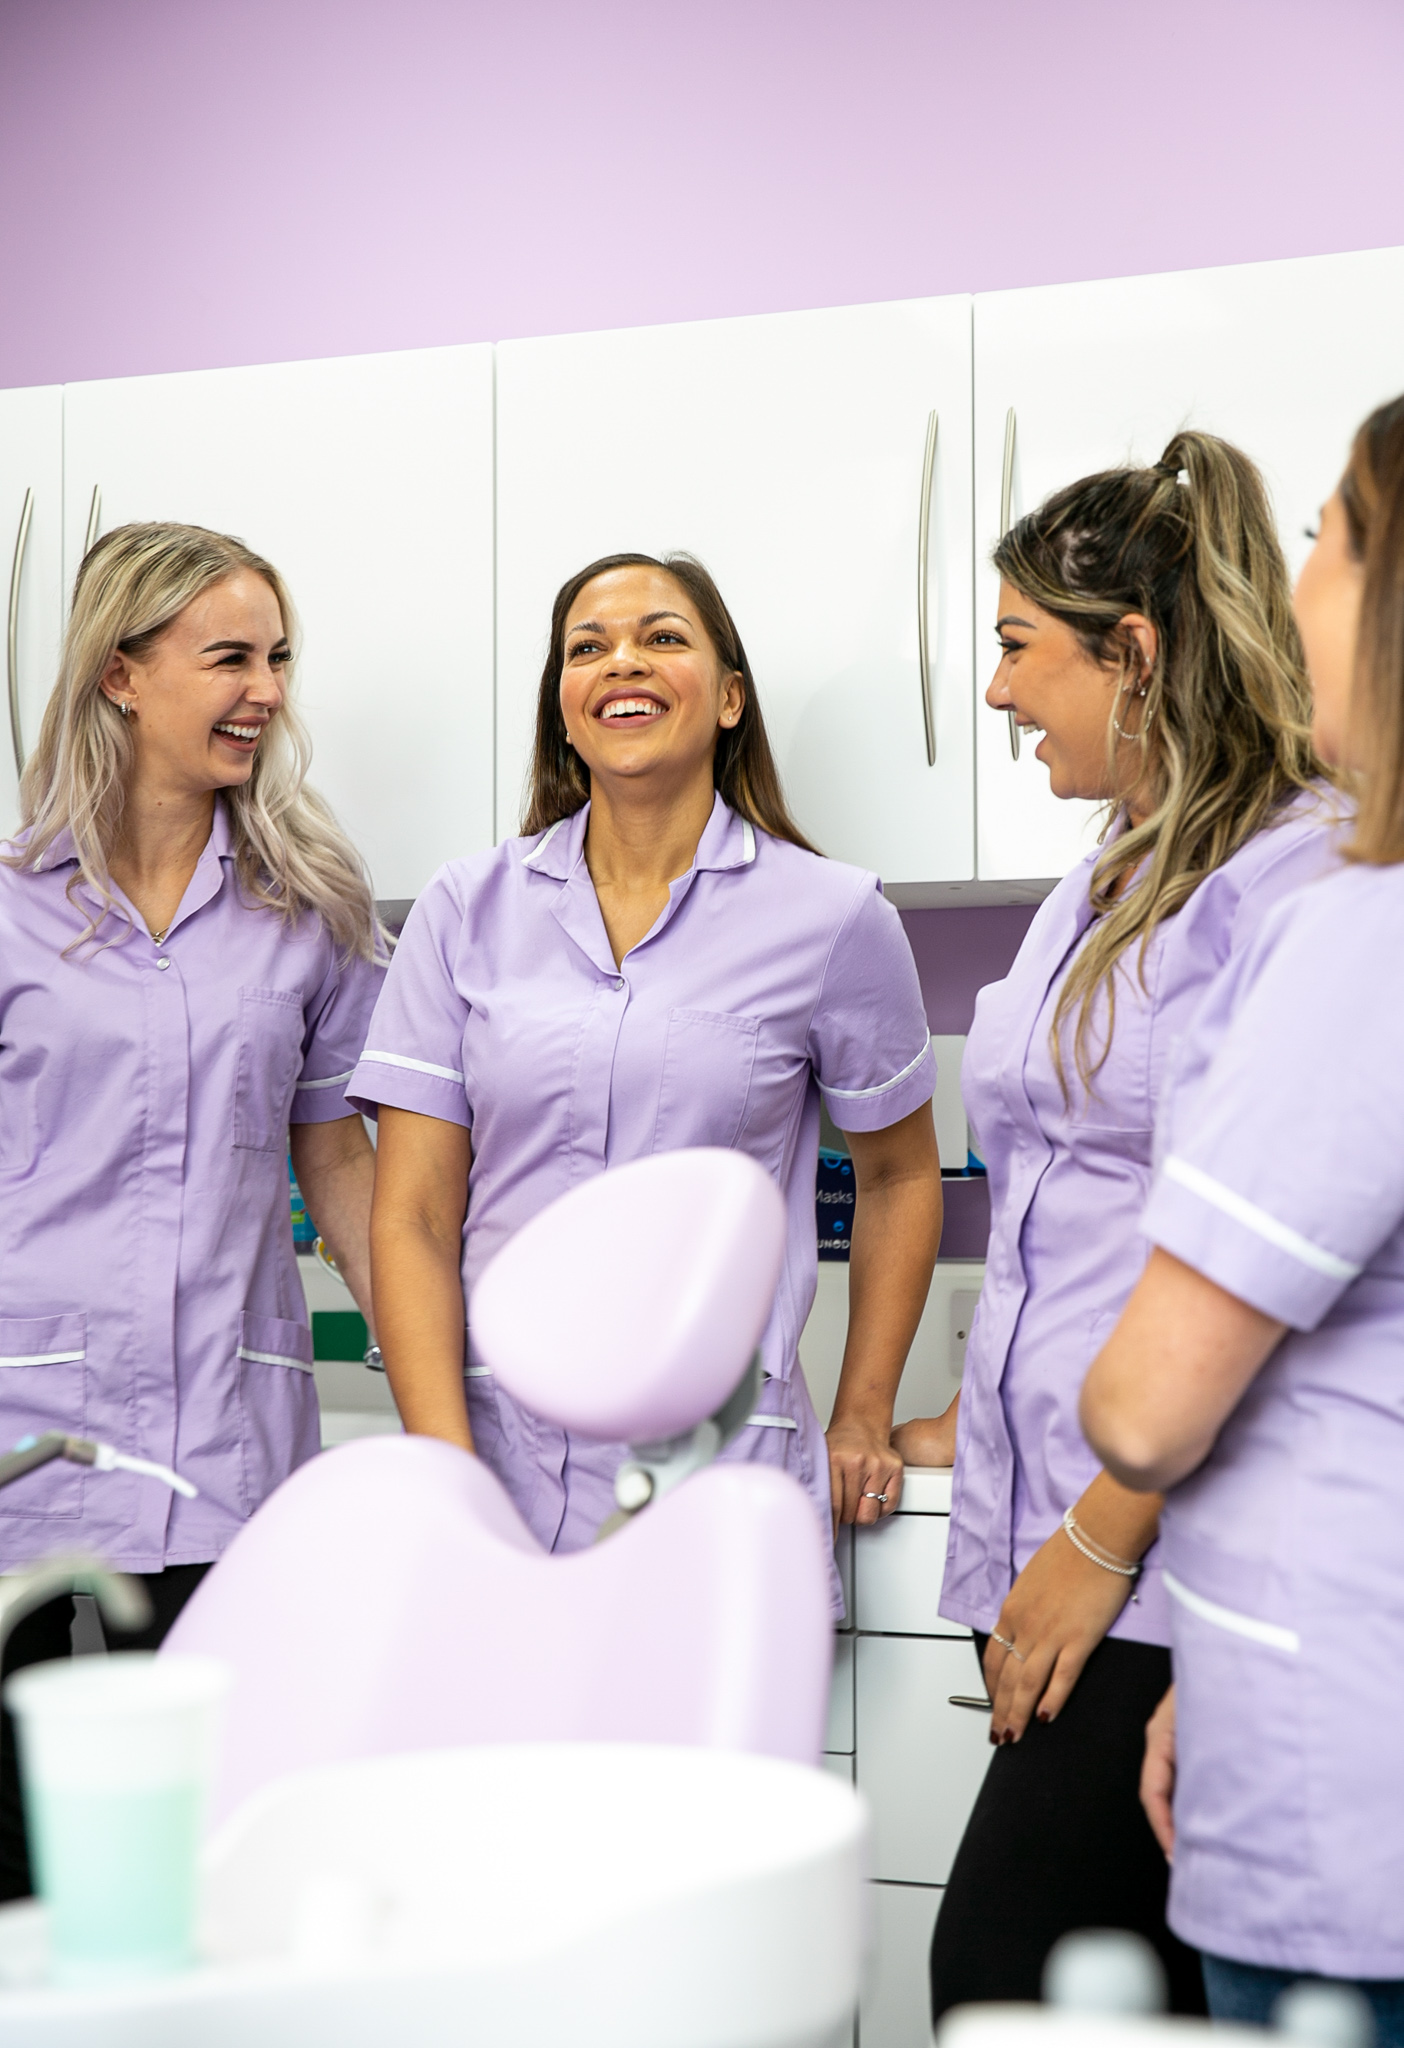 dentists-in-chessington, Gentle Smile Dental WELCOME FRIENDLY DENTISTS SURREY LOCAL PRIVATE DENTRISTRY